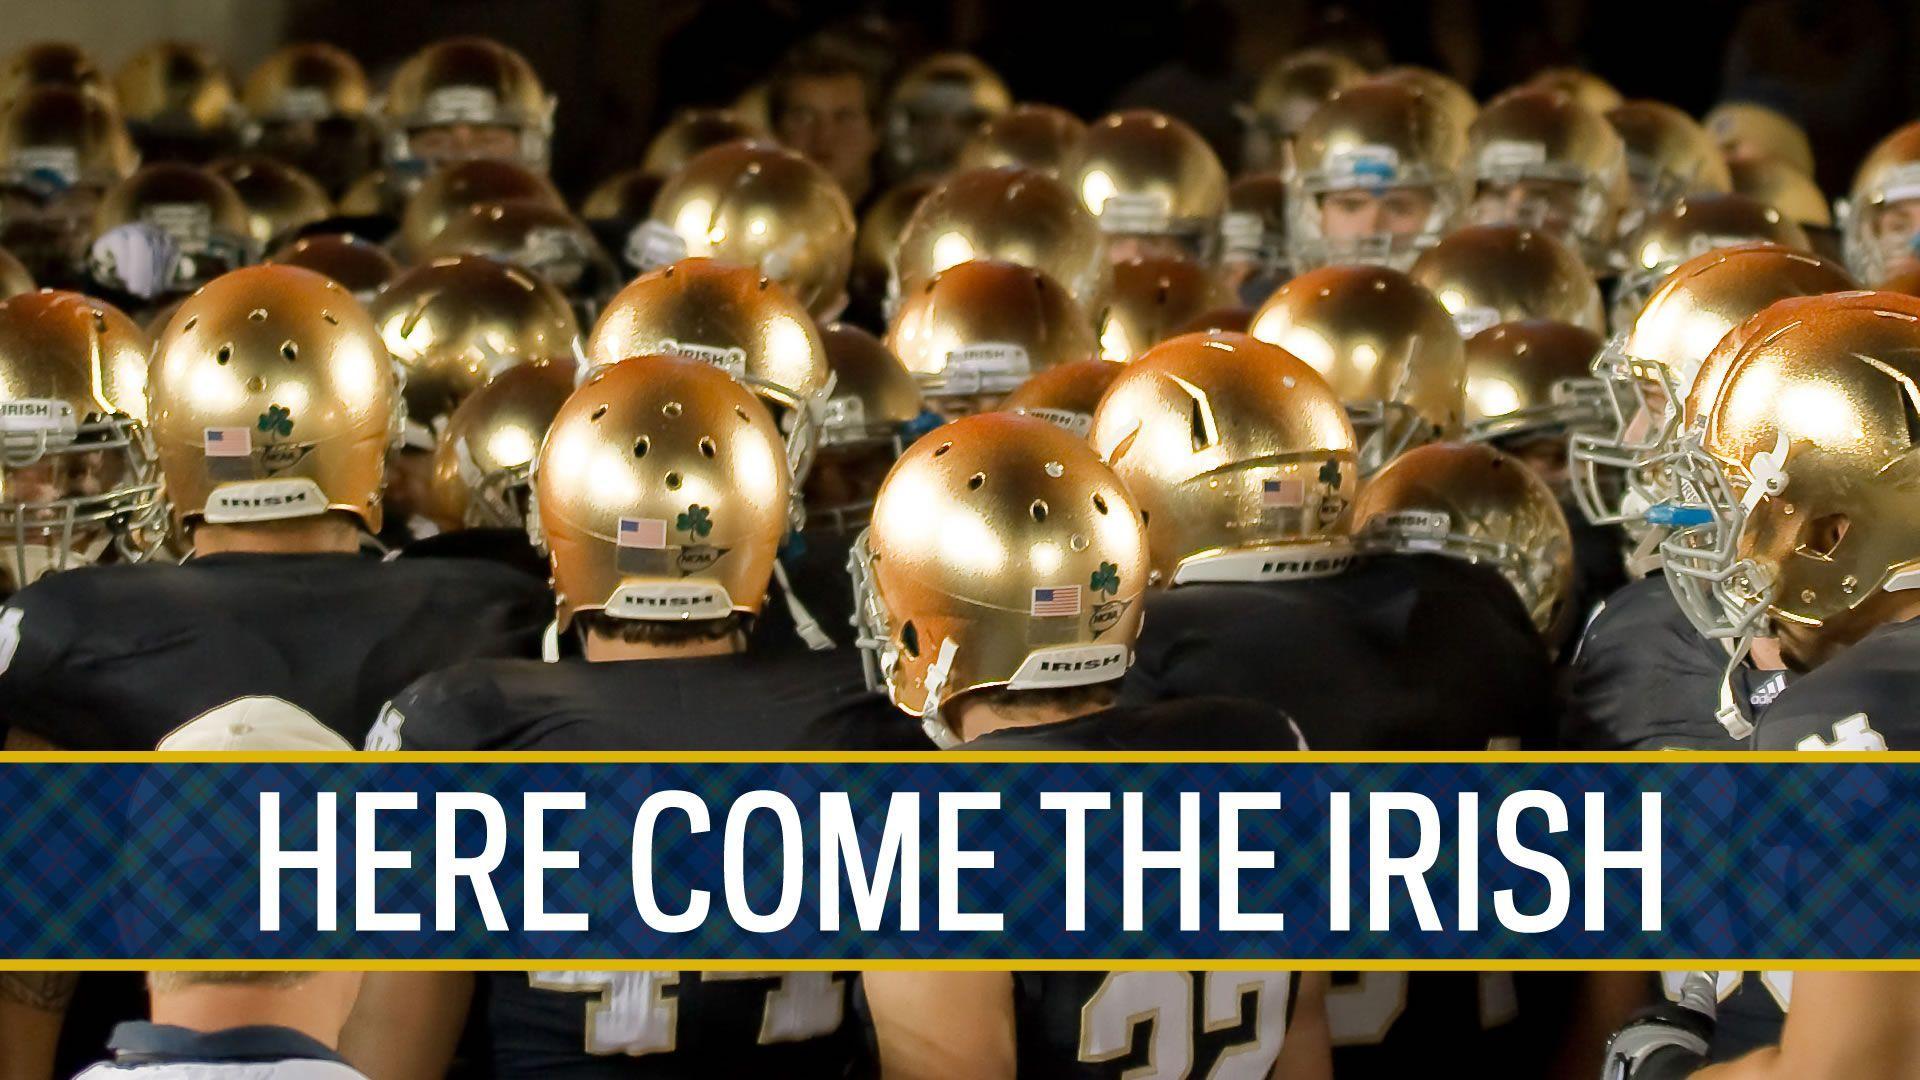 Background // Proud to Be ND // University of Notre Dame